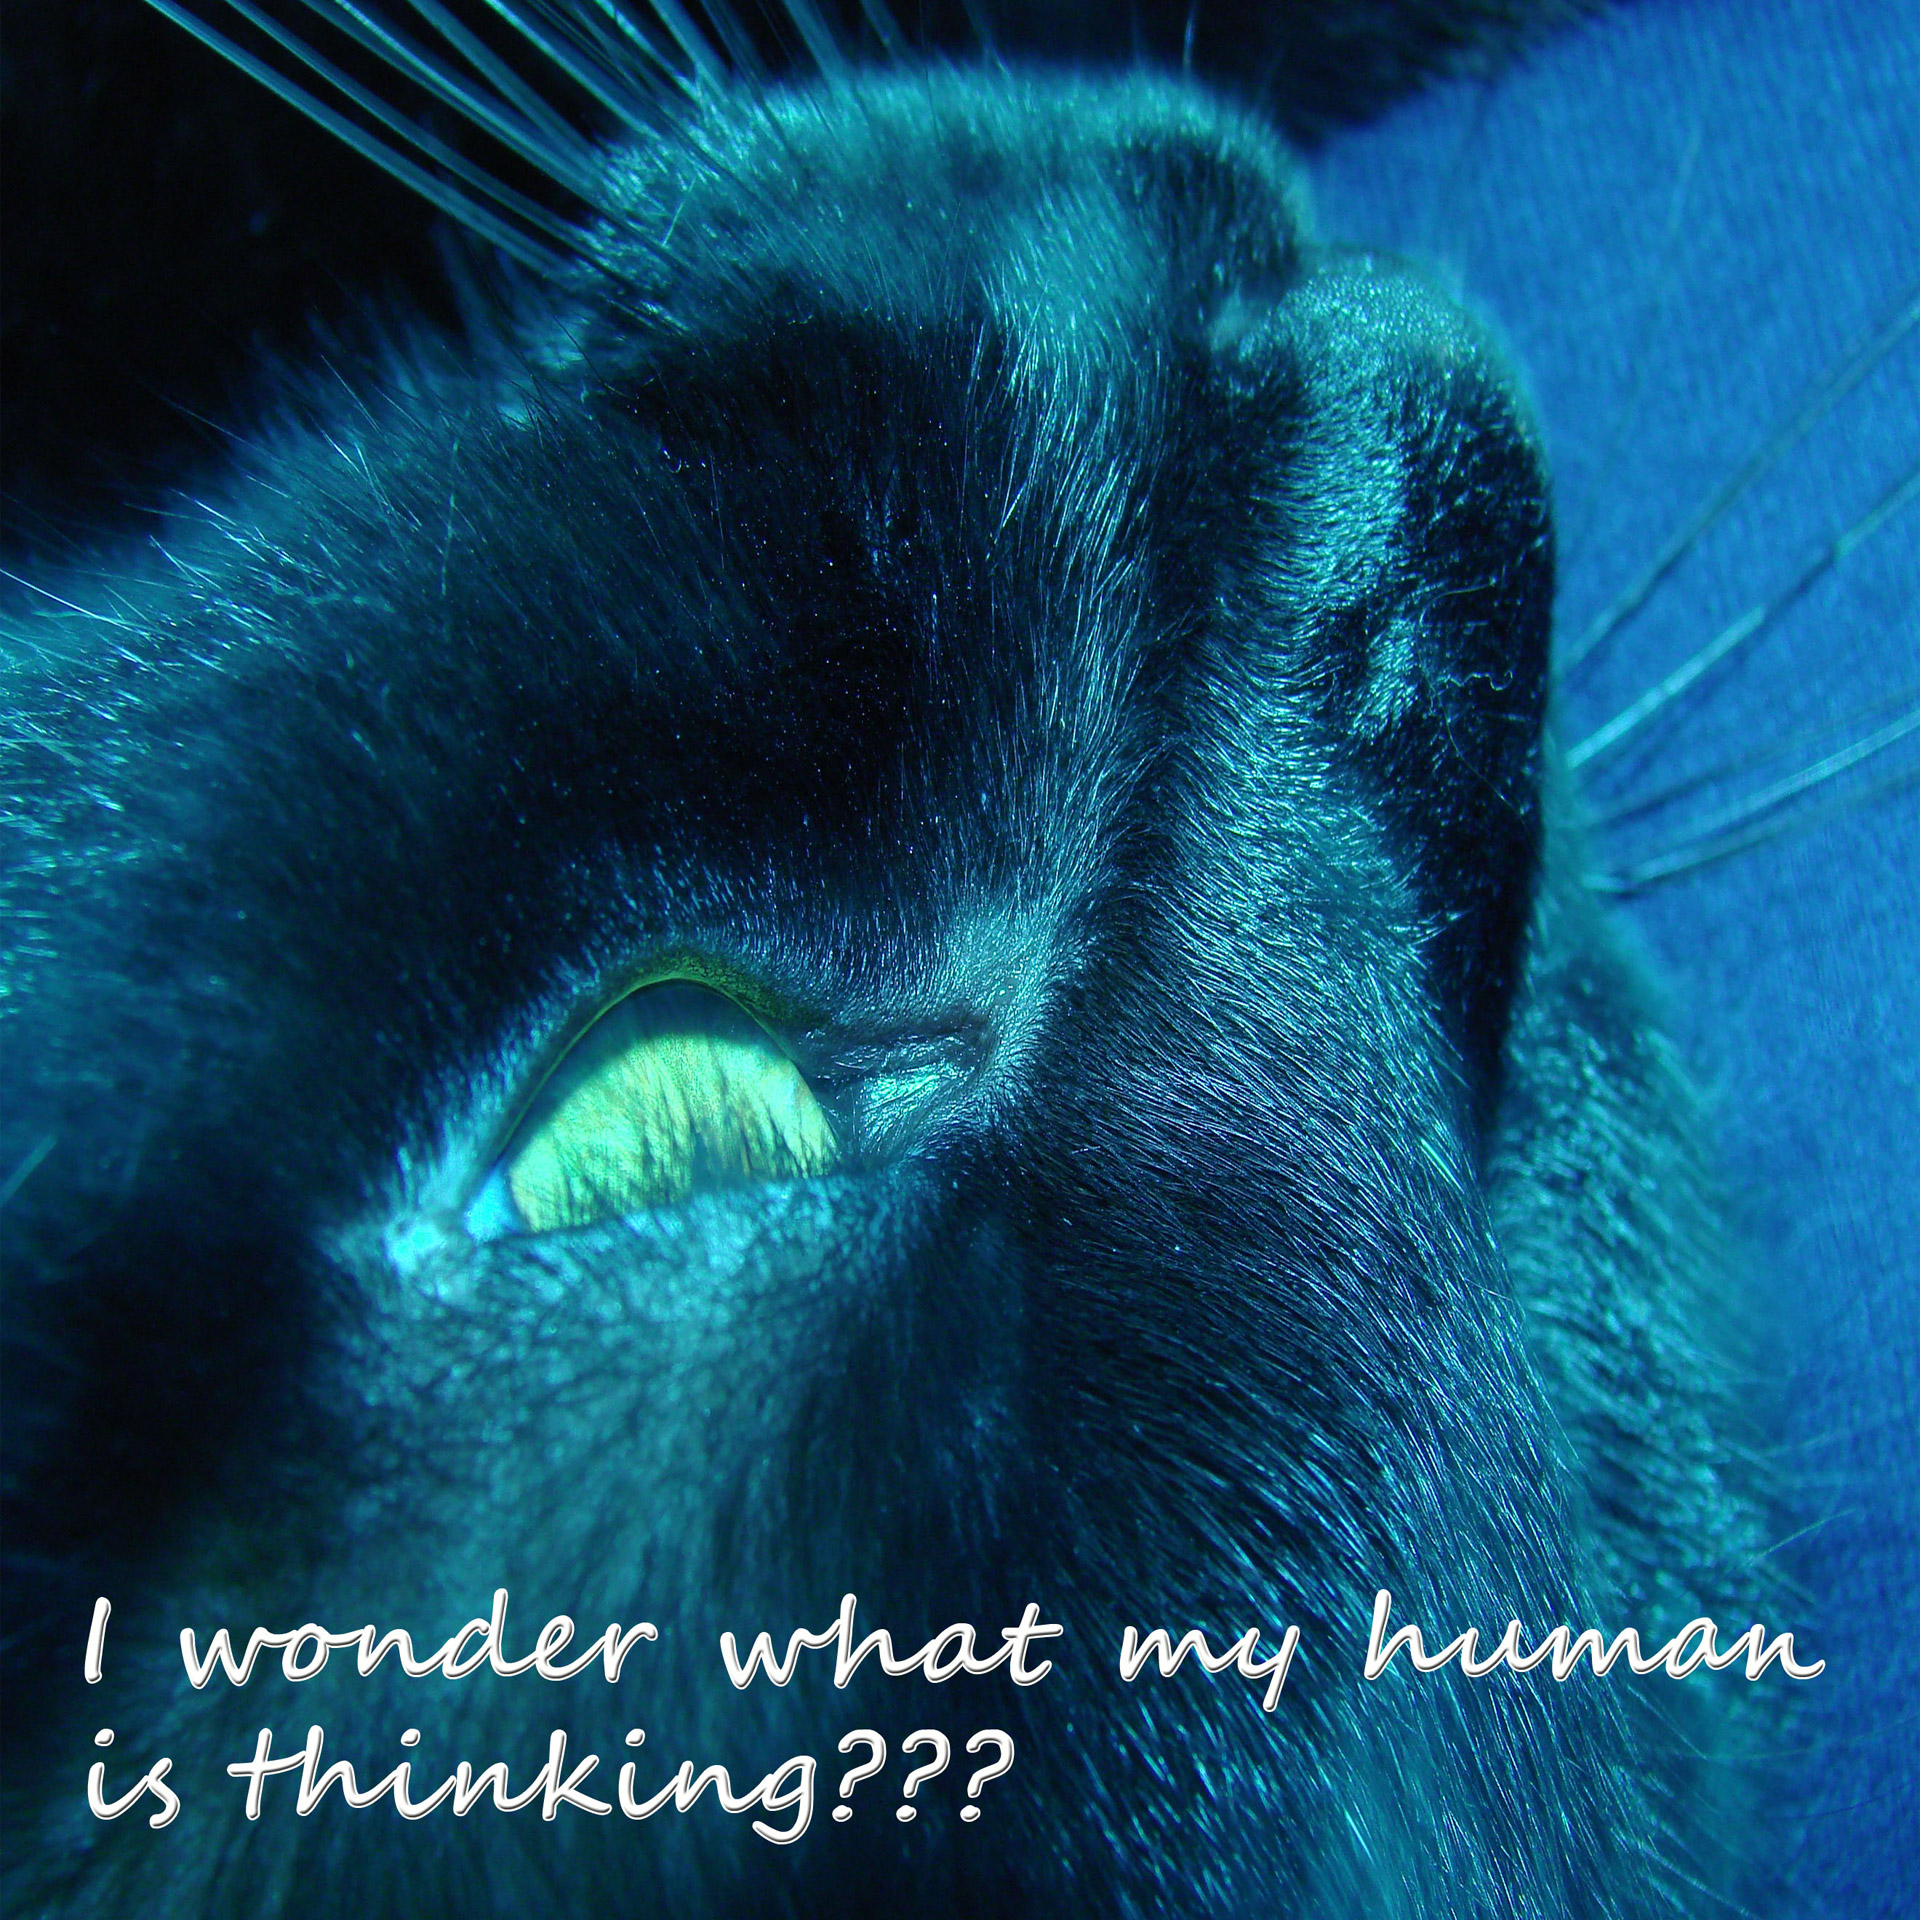 What Is My Human Thinking?